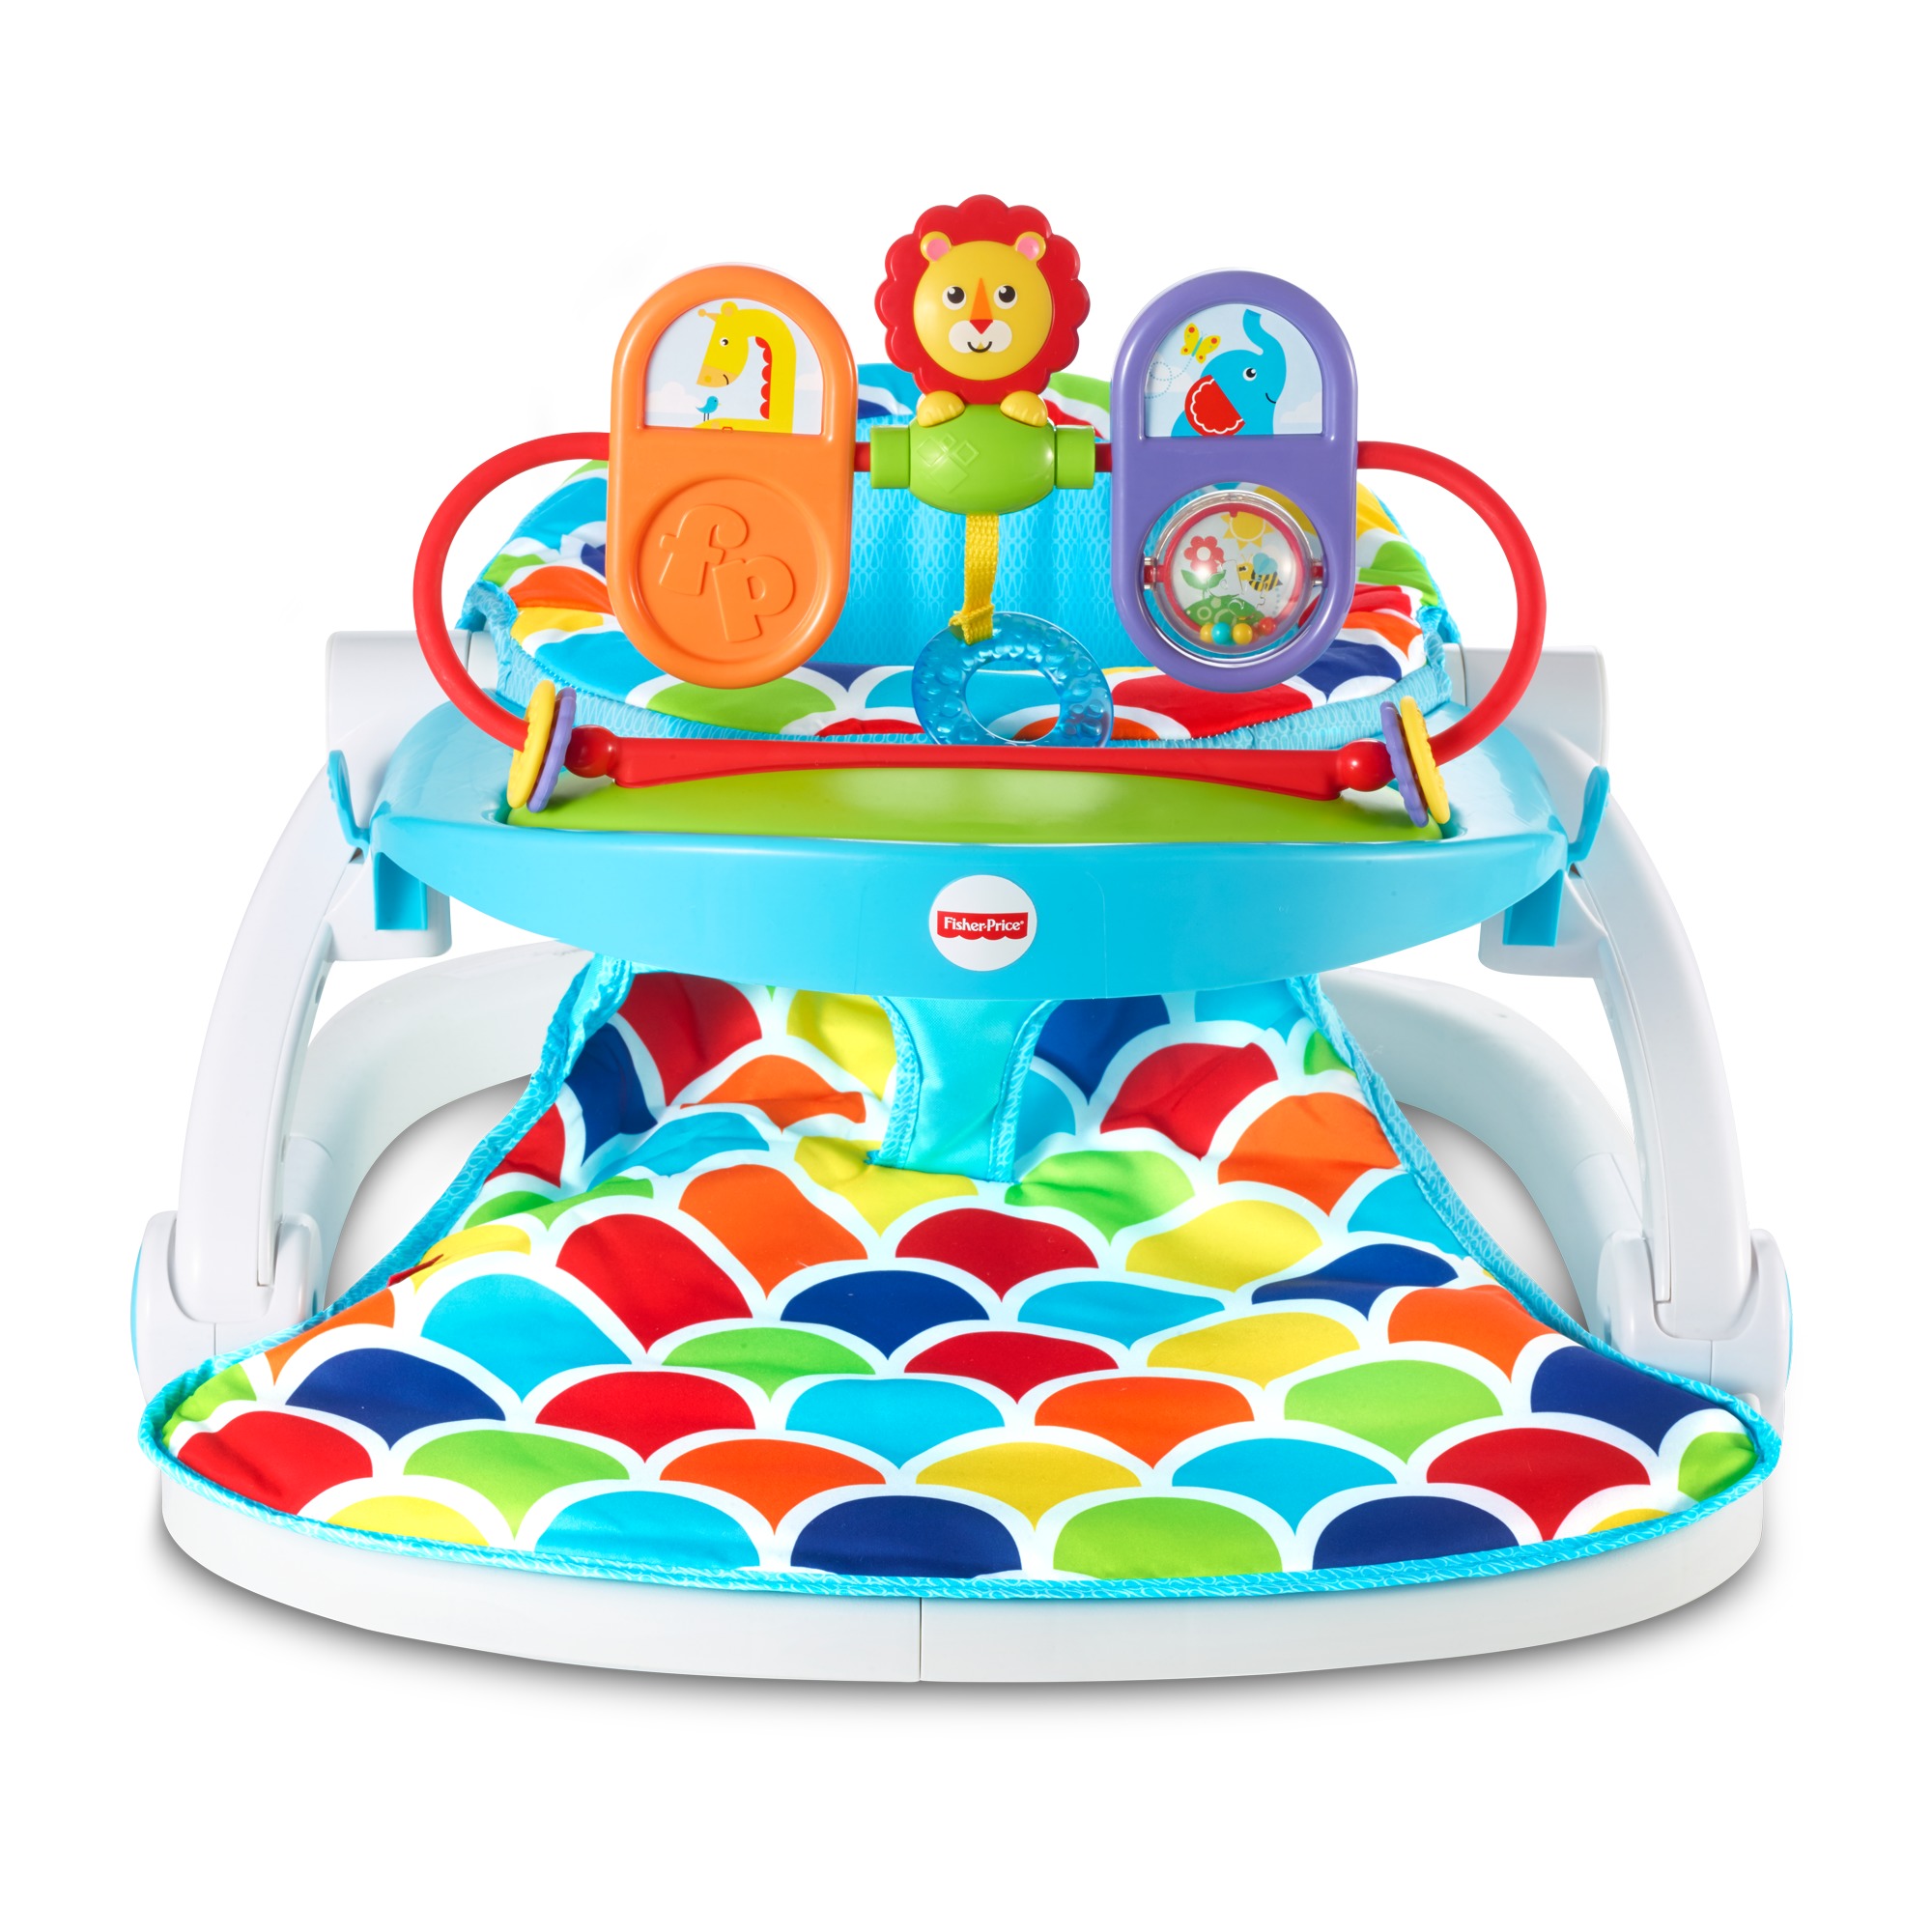 Fisher Price Deluxe Sit Me Up Floor Seat w/Toy Tray GBL20